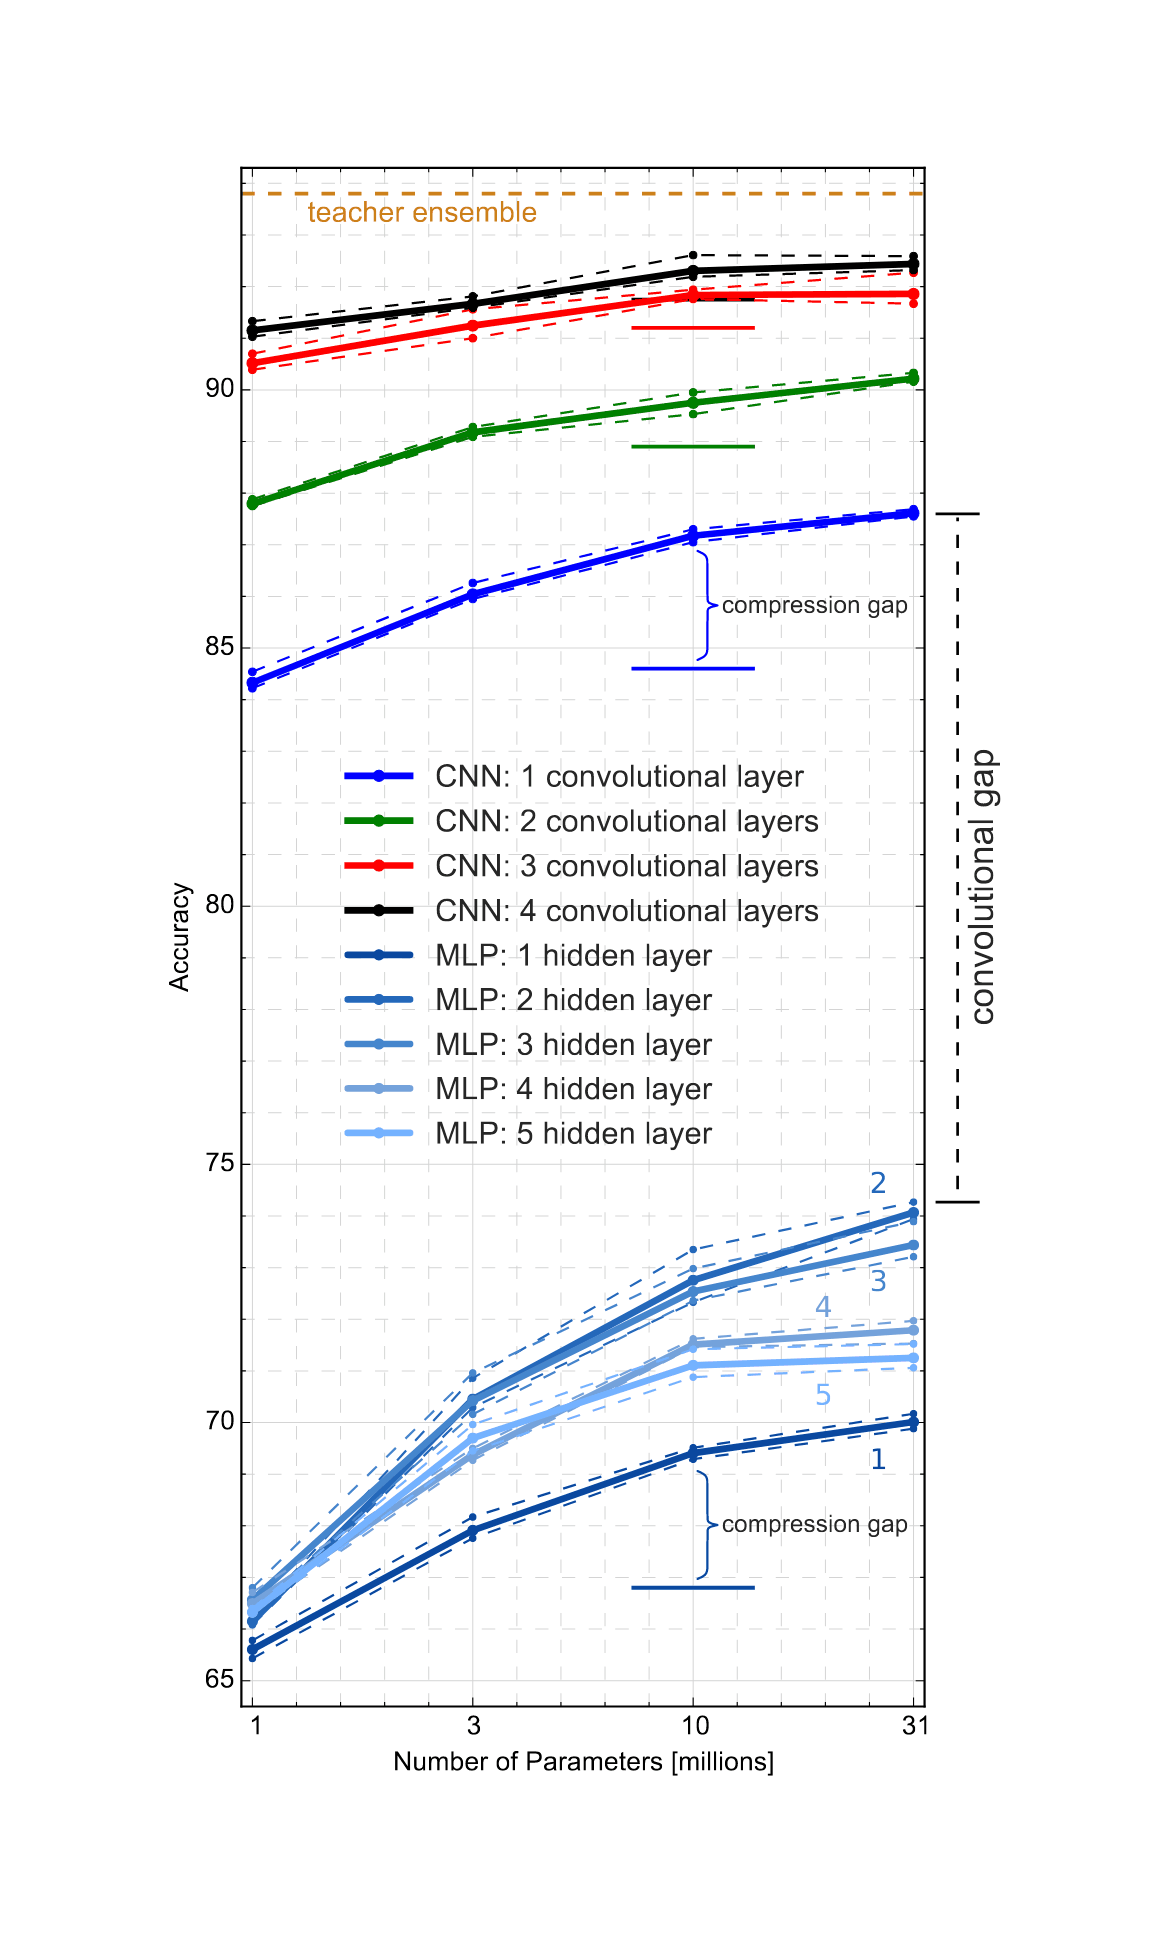 Figure 1: Accuracy of student models with different architectures trained to mimic the CIFAR10 ensemble. The average performance of the 5 best models of each hyperparameter-optimization experiment is shown, together with dashed lines indicating the accuracy of the best and the fifth best model from each setting. The short horizontal lines at 10M parameters are the accuracy of models trained without compression on the original 0/​1 hard targets.